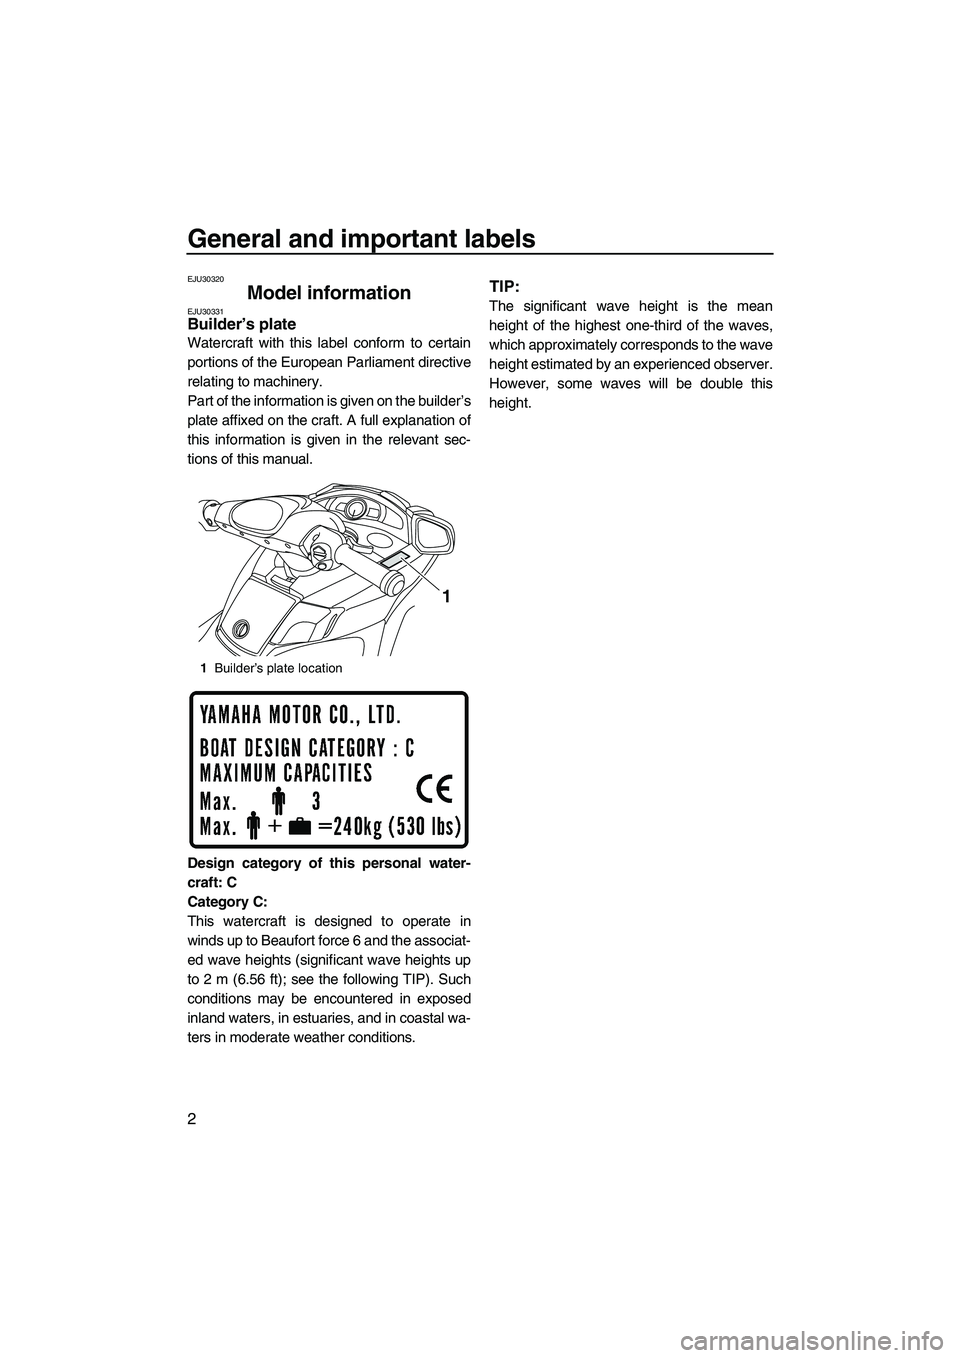 YAMAHA SVHO CRUISER 2011  Owners Manual General and important labels
2
EJU30320
Model information EJU30331Builder’s plate 
Watercraft with this label conform to certain
portions of the European Parliament directive
relating to machinery.
